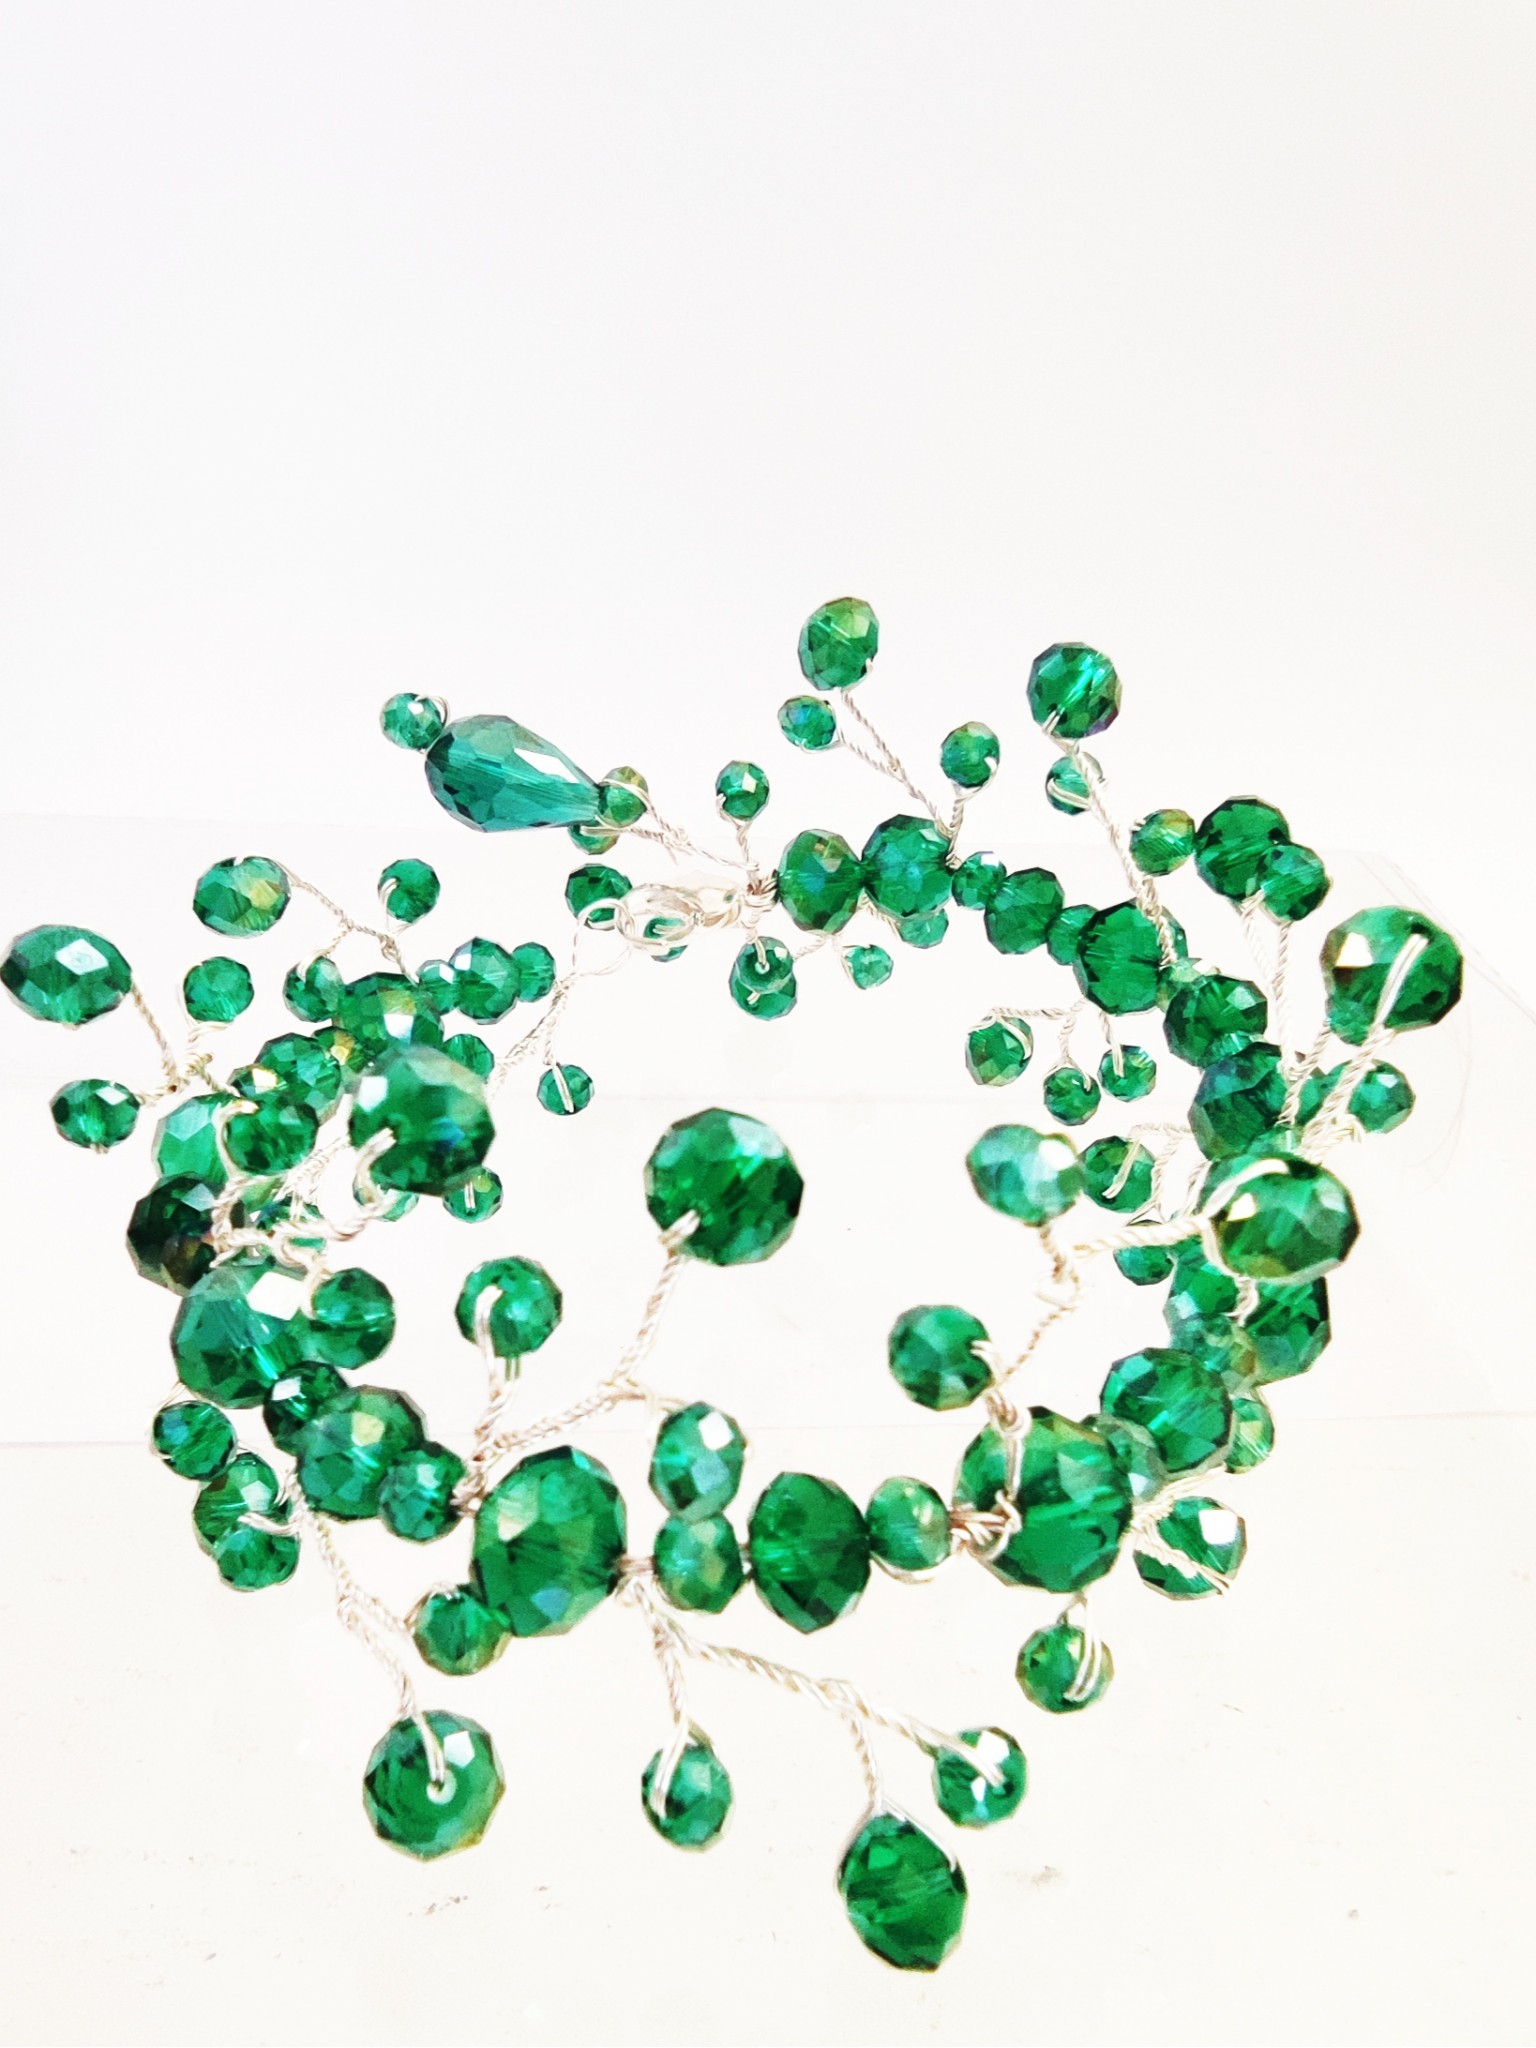 Luxurious Emerald Green Crystal Bracelet for Special Occasions- Goddess Artemis